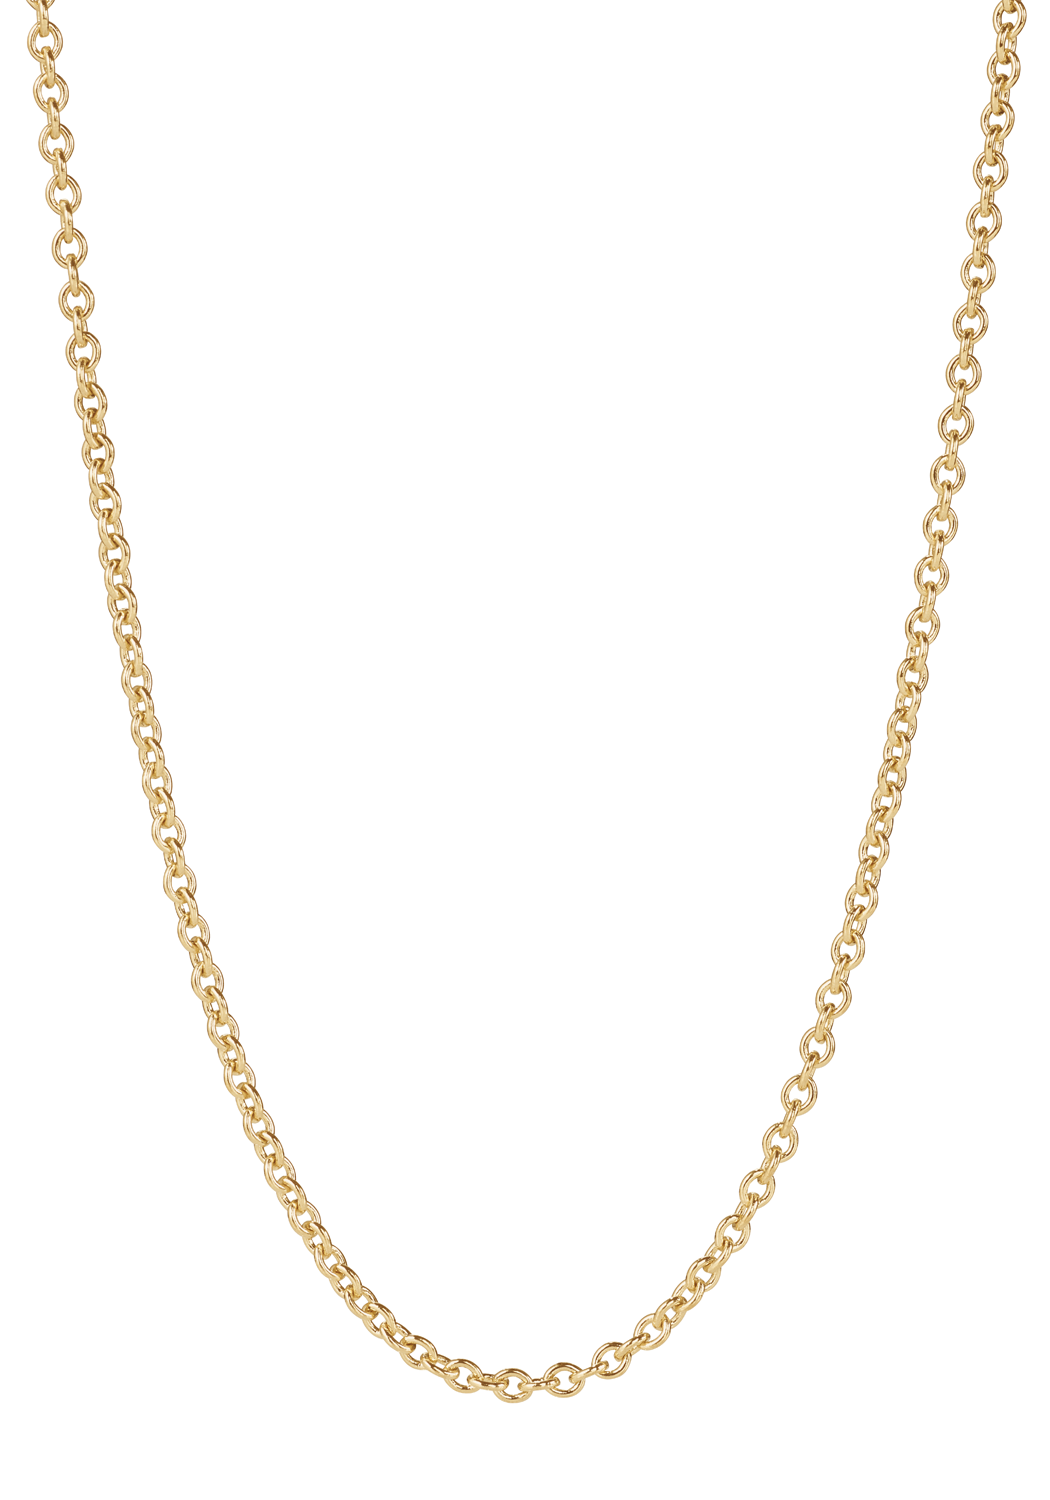 Ole Lynggaard Design Collier 18KYG Chain Necklace | Ref. C2017-407 | OsterJewelers.com